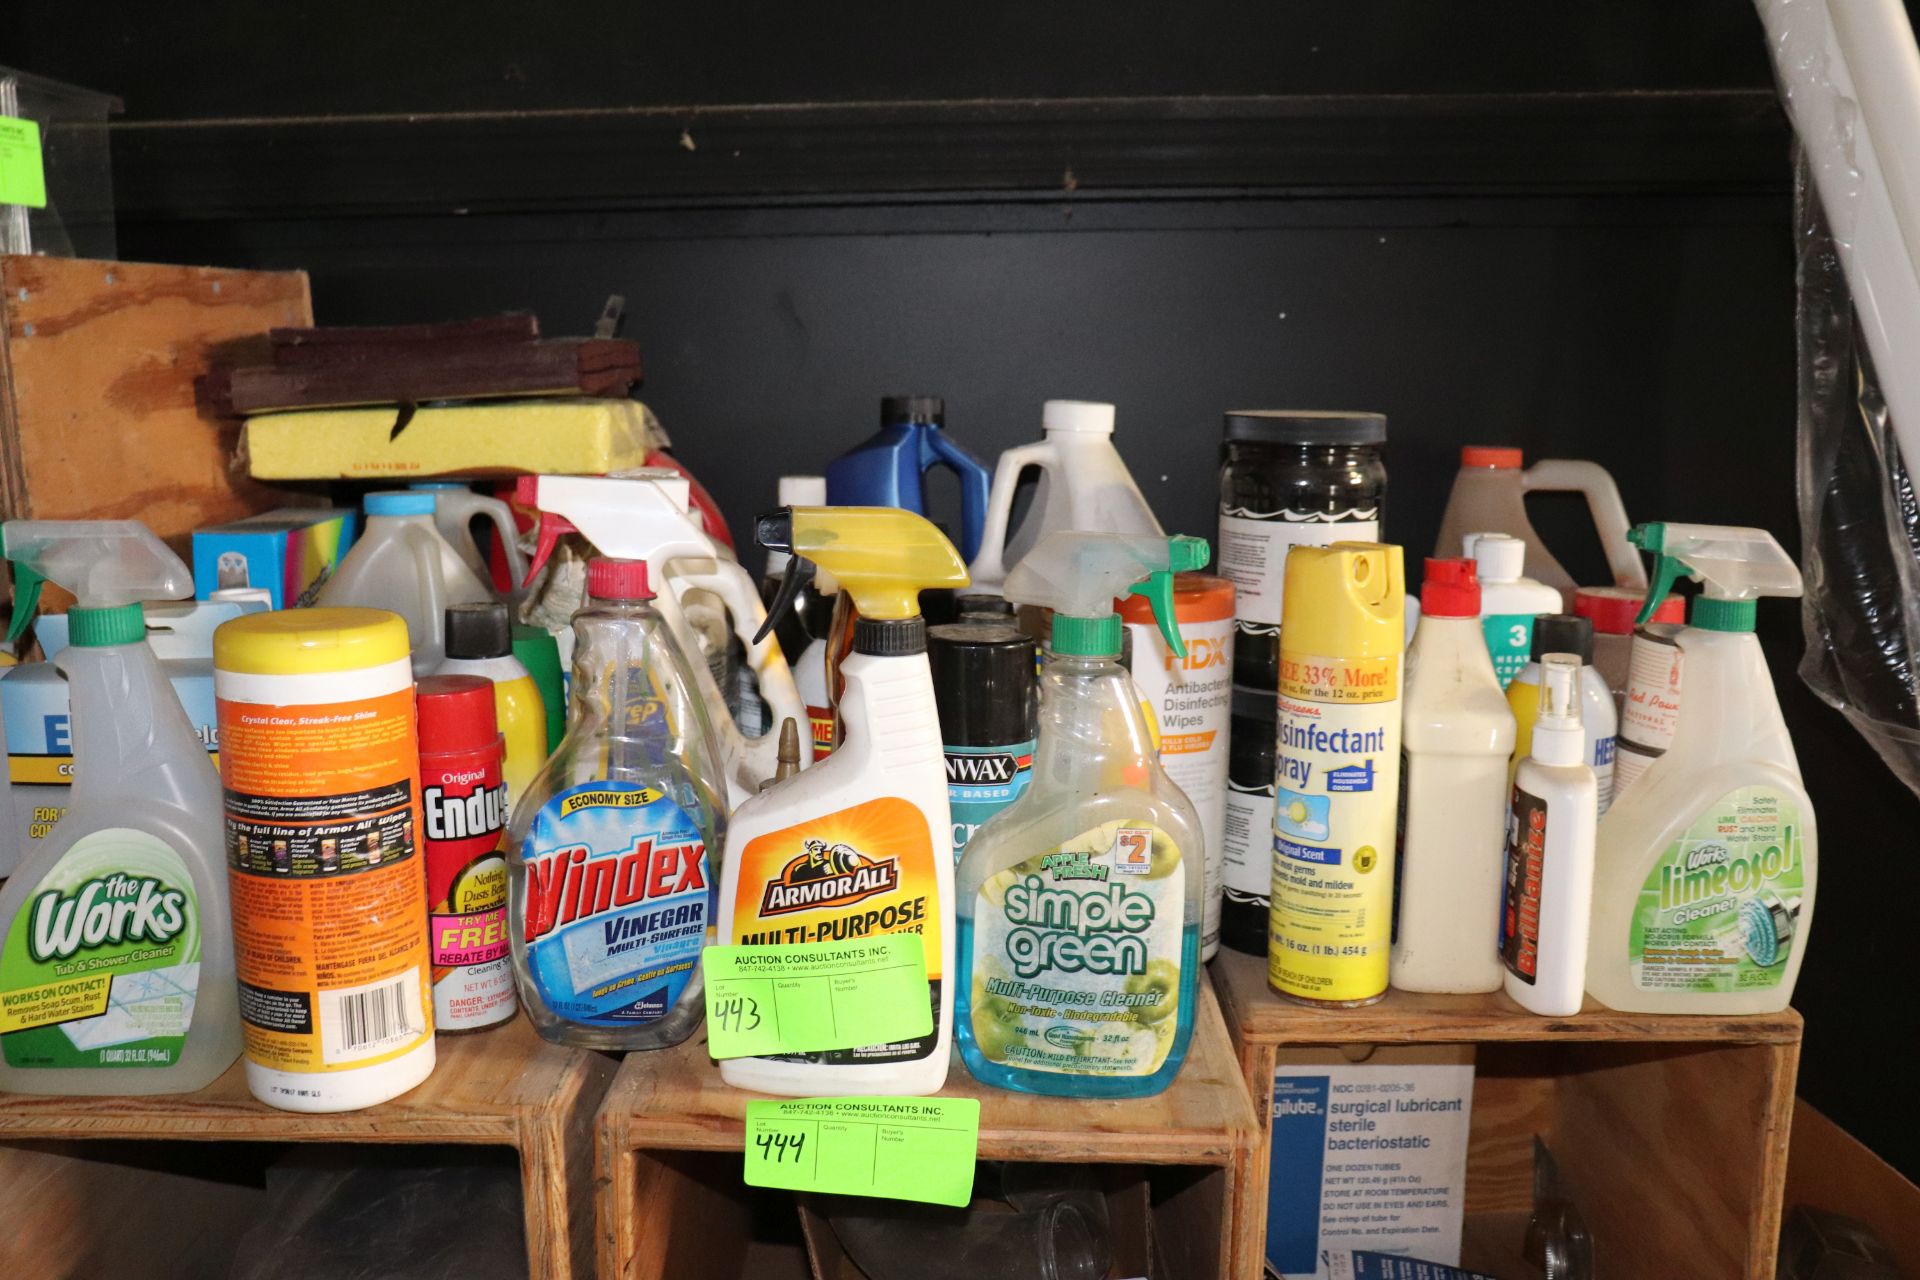 Various cleaning chemicals, everything pictured